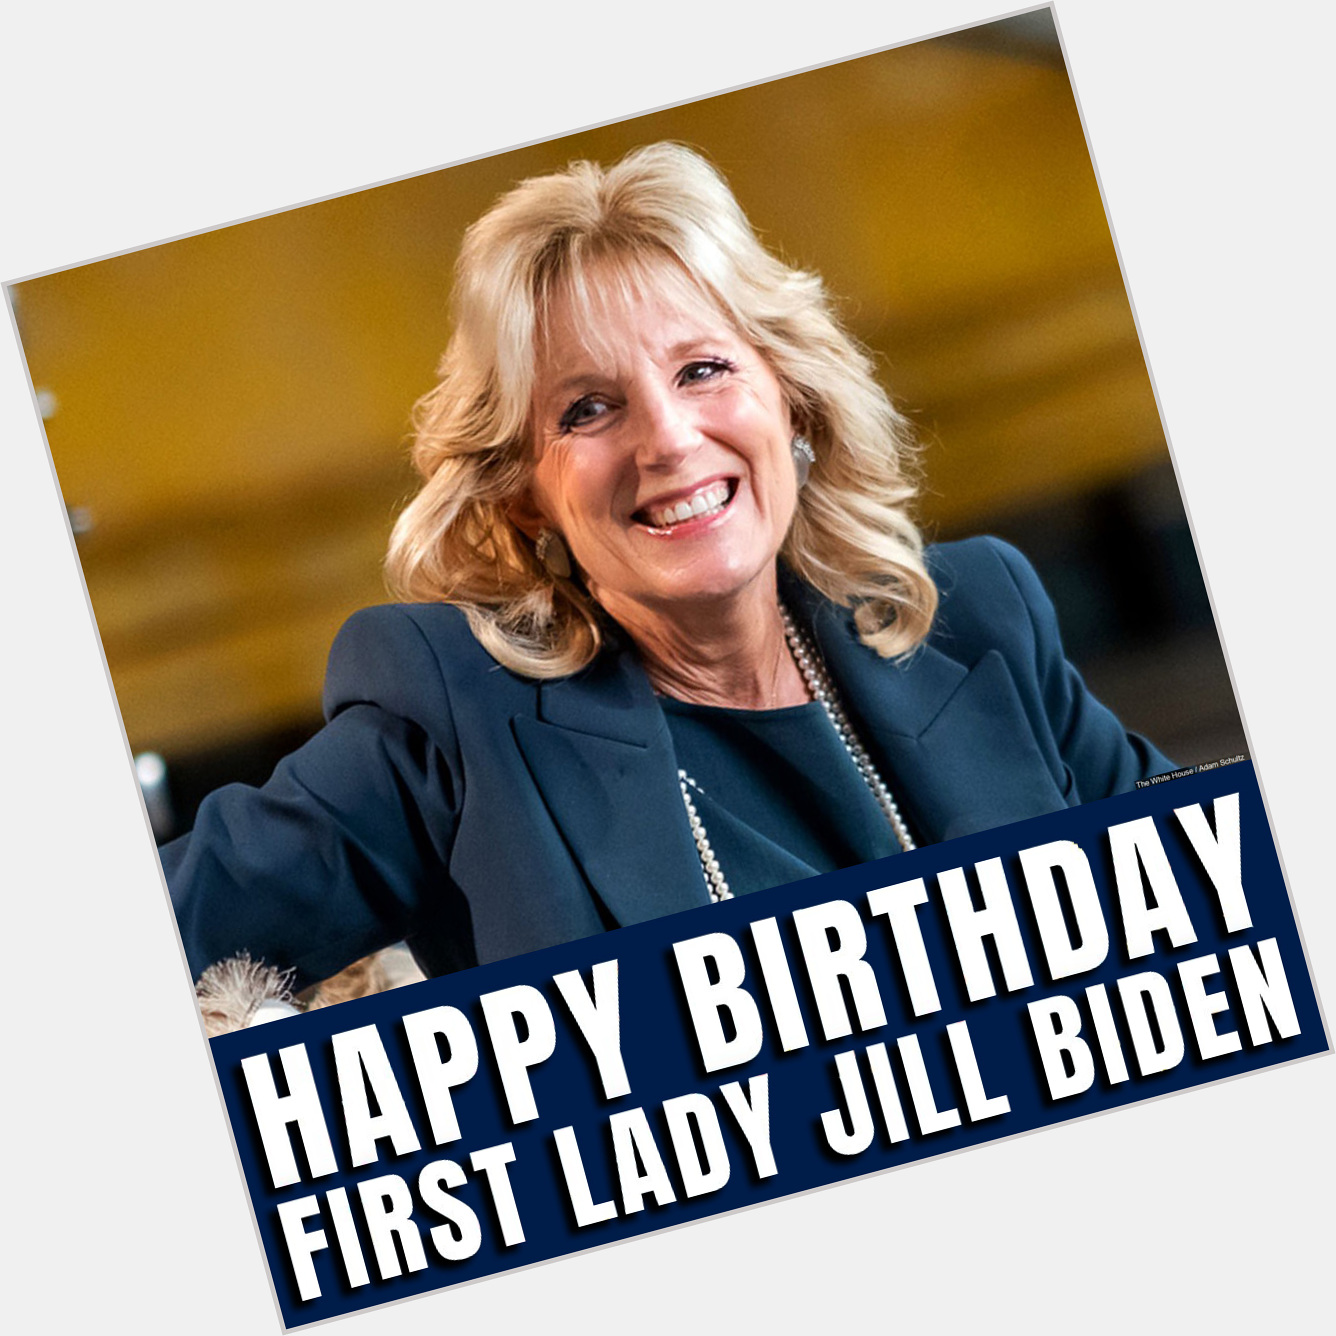 HAPPY BIRTHDAY! Join us in wishing a very happy birthday to First Lady Dr. Jill Biden, who turns 70 today!   